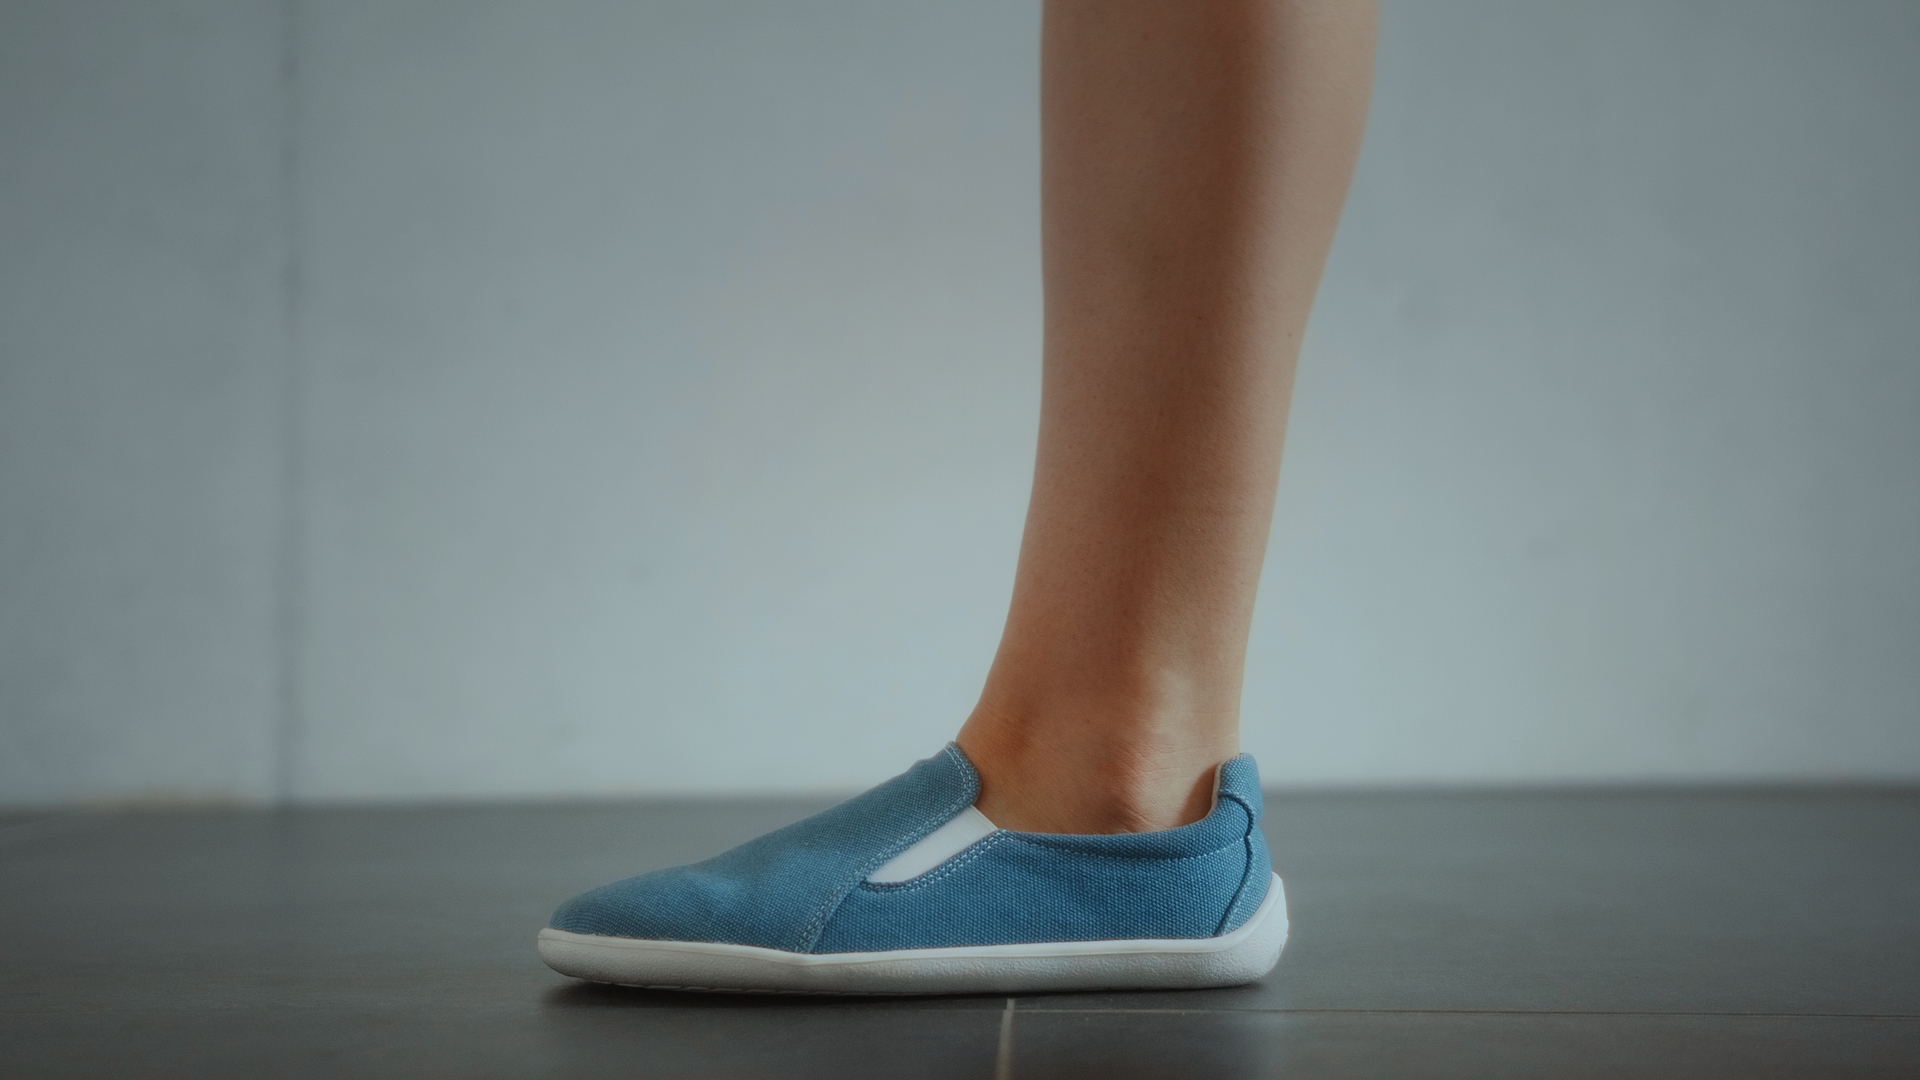 Experience the barefoot comfort - Switch to Be Lenka barefoot.